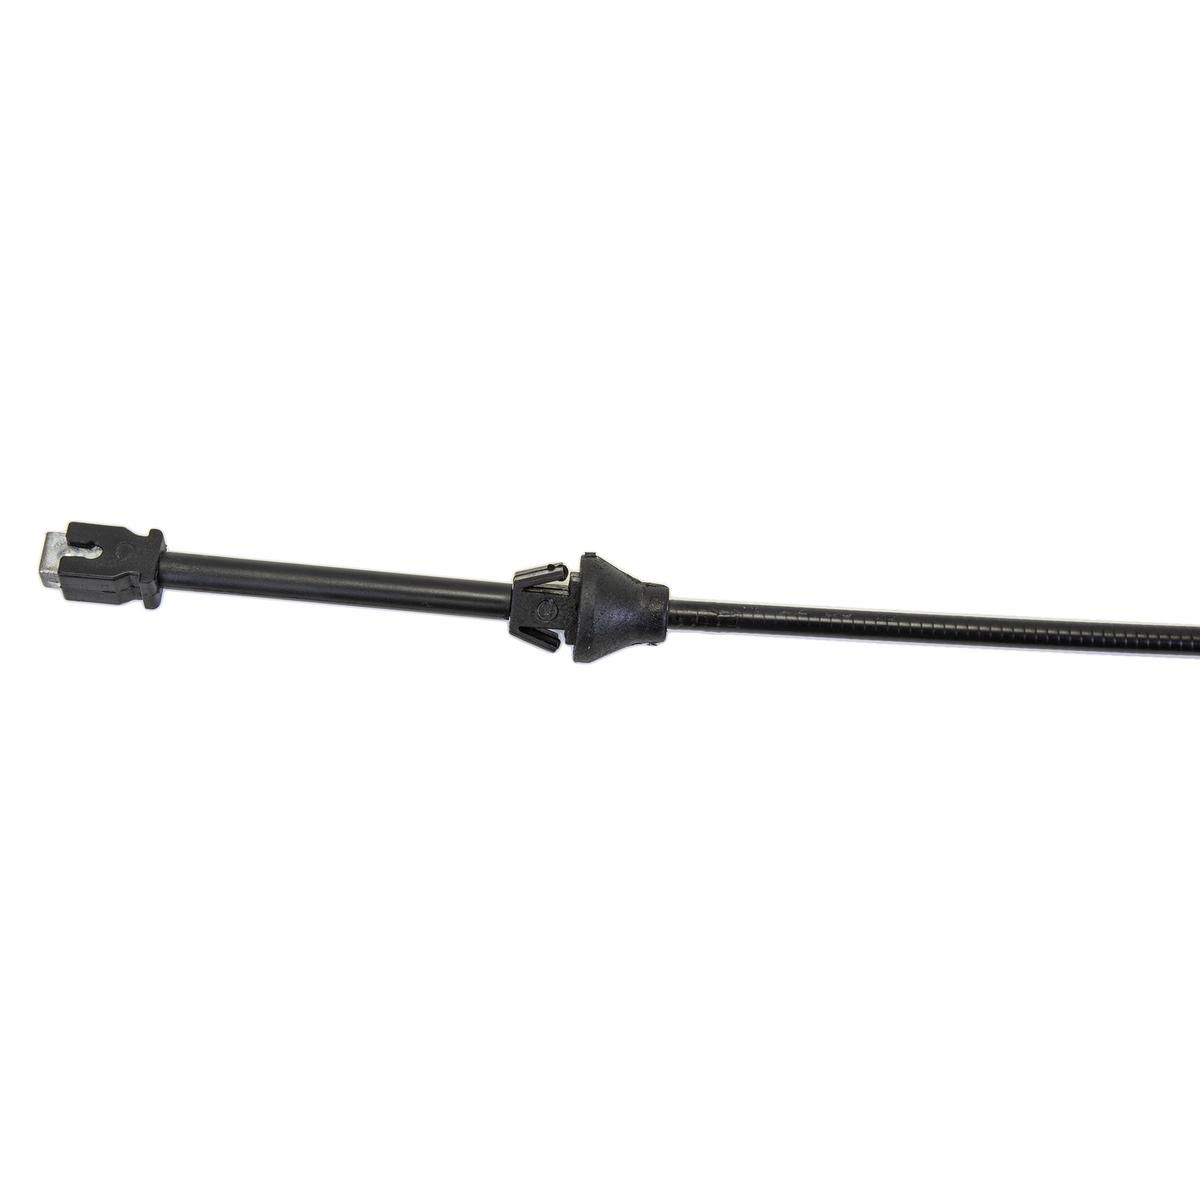 EZGO Accelerator Cable (Years 1983-1987)